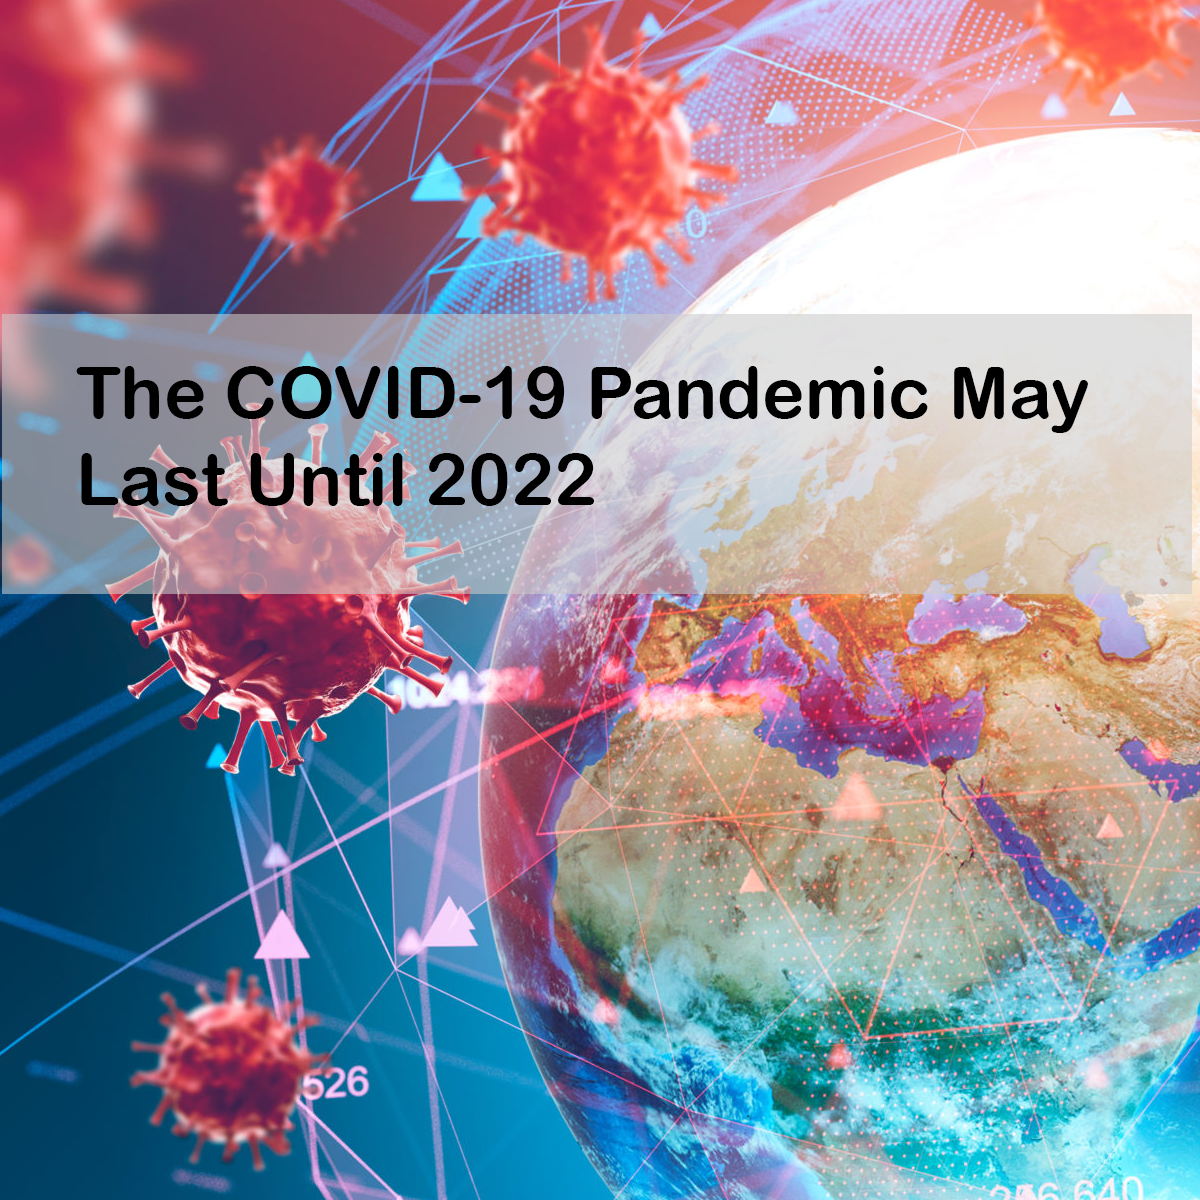 The COVID-19 Pandemic May Last Until 2022